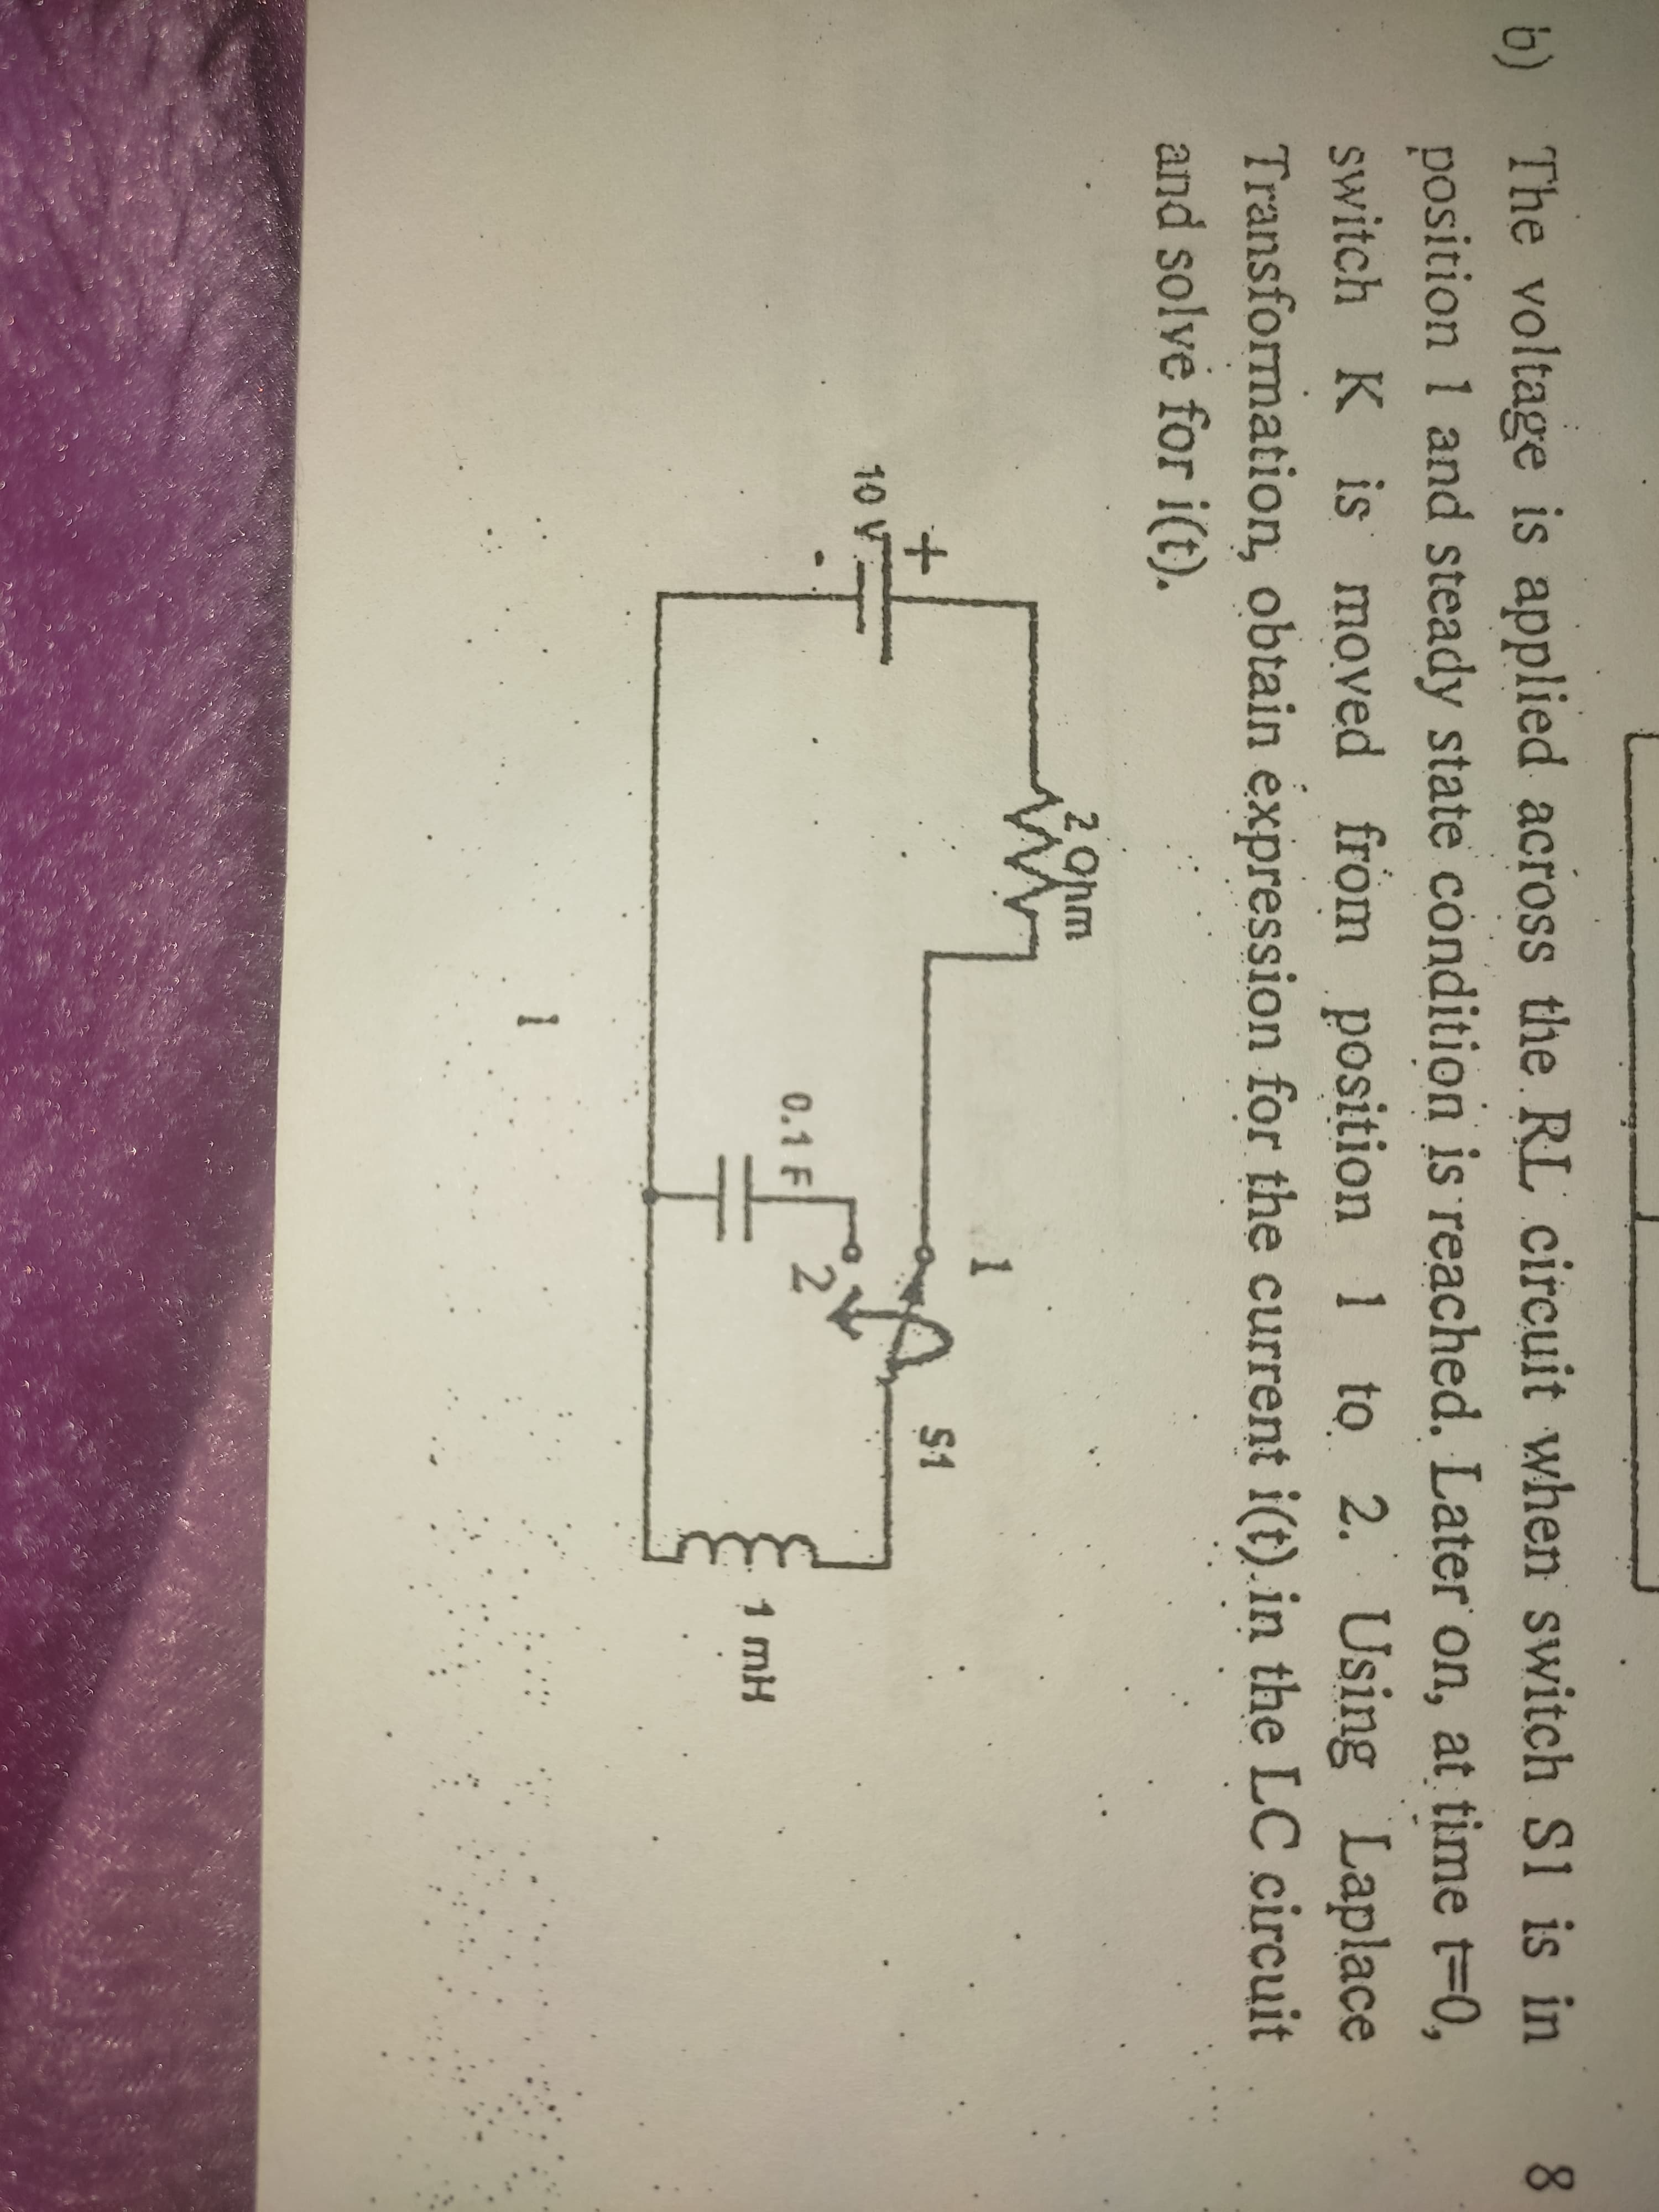 b) The voltage is applied across the RL circuit when switch S1 is in
position 1 and steady state condition is reached. Later on, at time t-0,
switch K is moved from position 1 to 2. Using Laplace
Transformation, obtain expression for the current i(t).in the LC circuit
and solve for i(t).
8.
2 Ohm
S1
10 V
0.1 F
1 mH
I.
1
